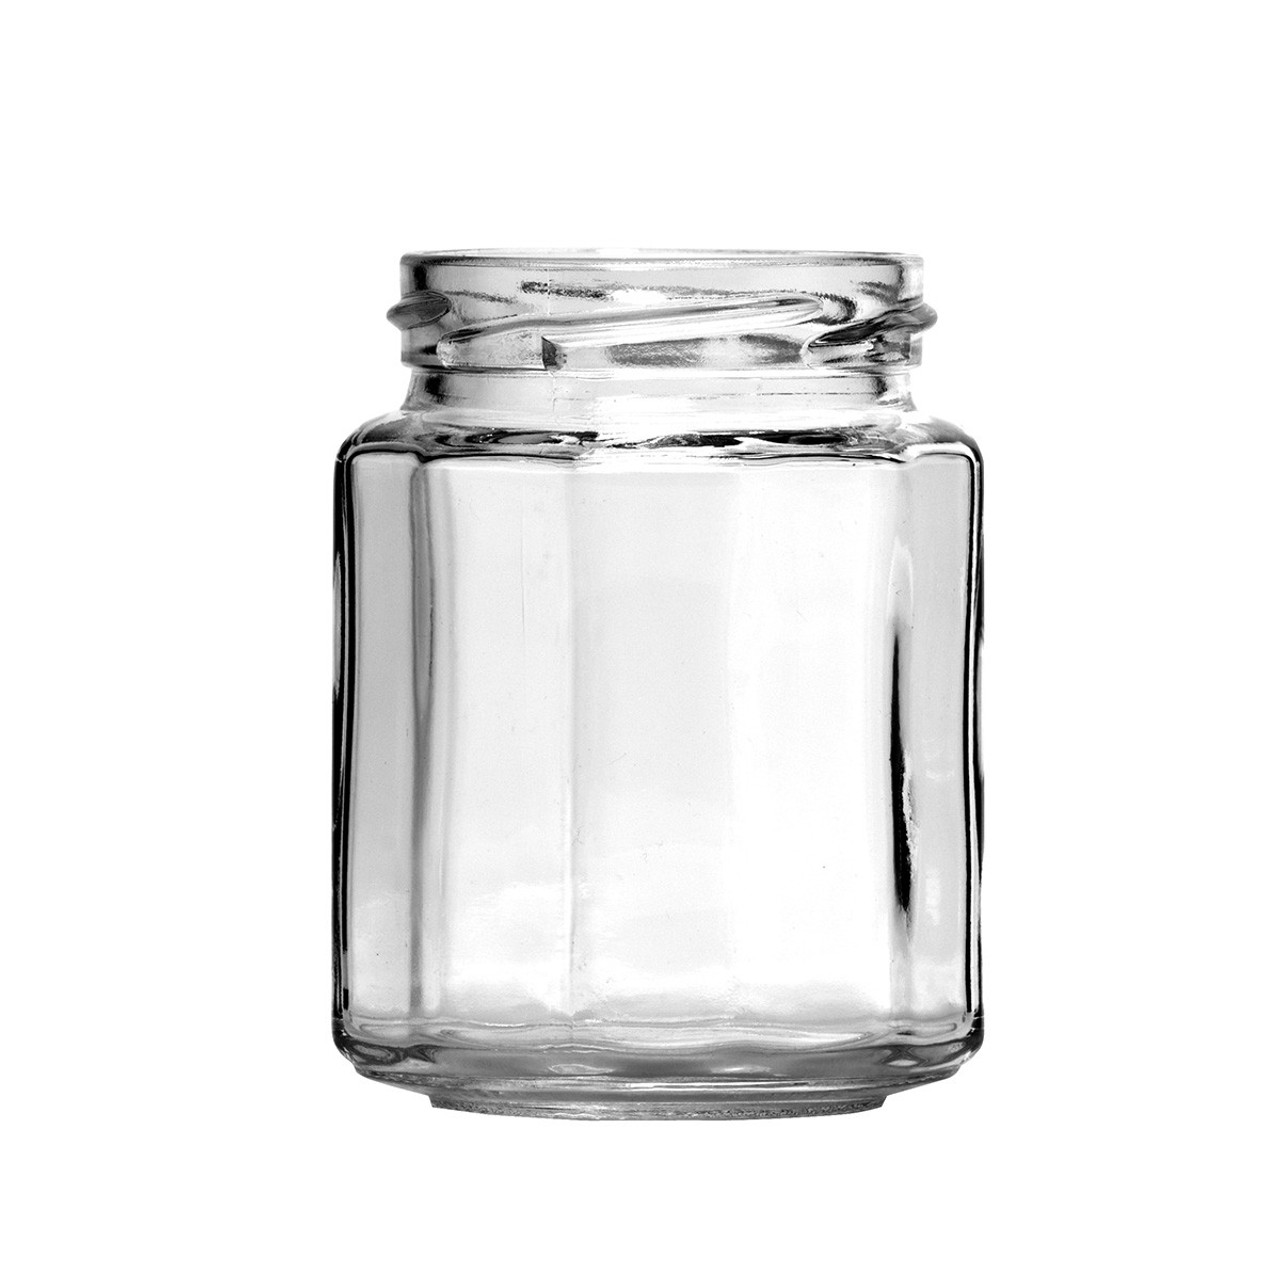 Candle Making Supplies  PVC CANDLE JAR LID - FITS TALL GLASS 100